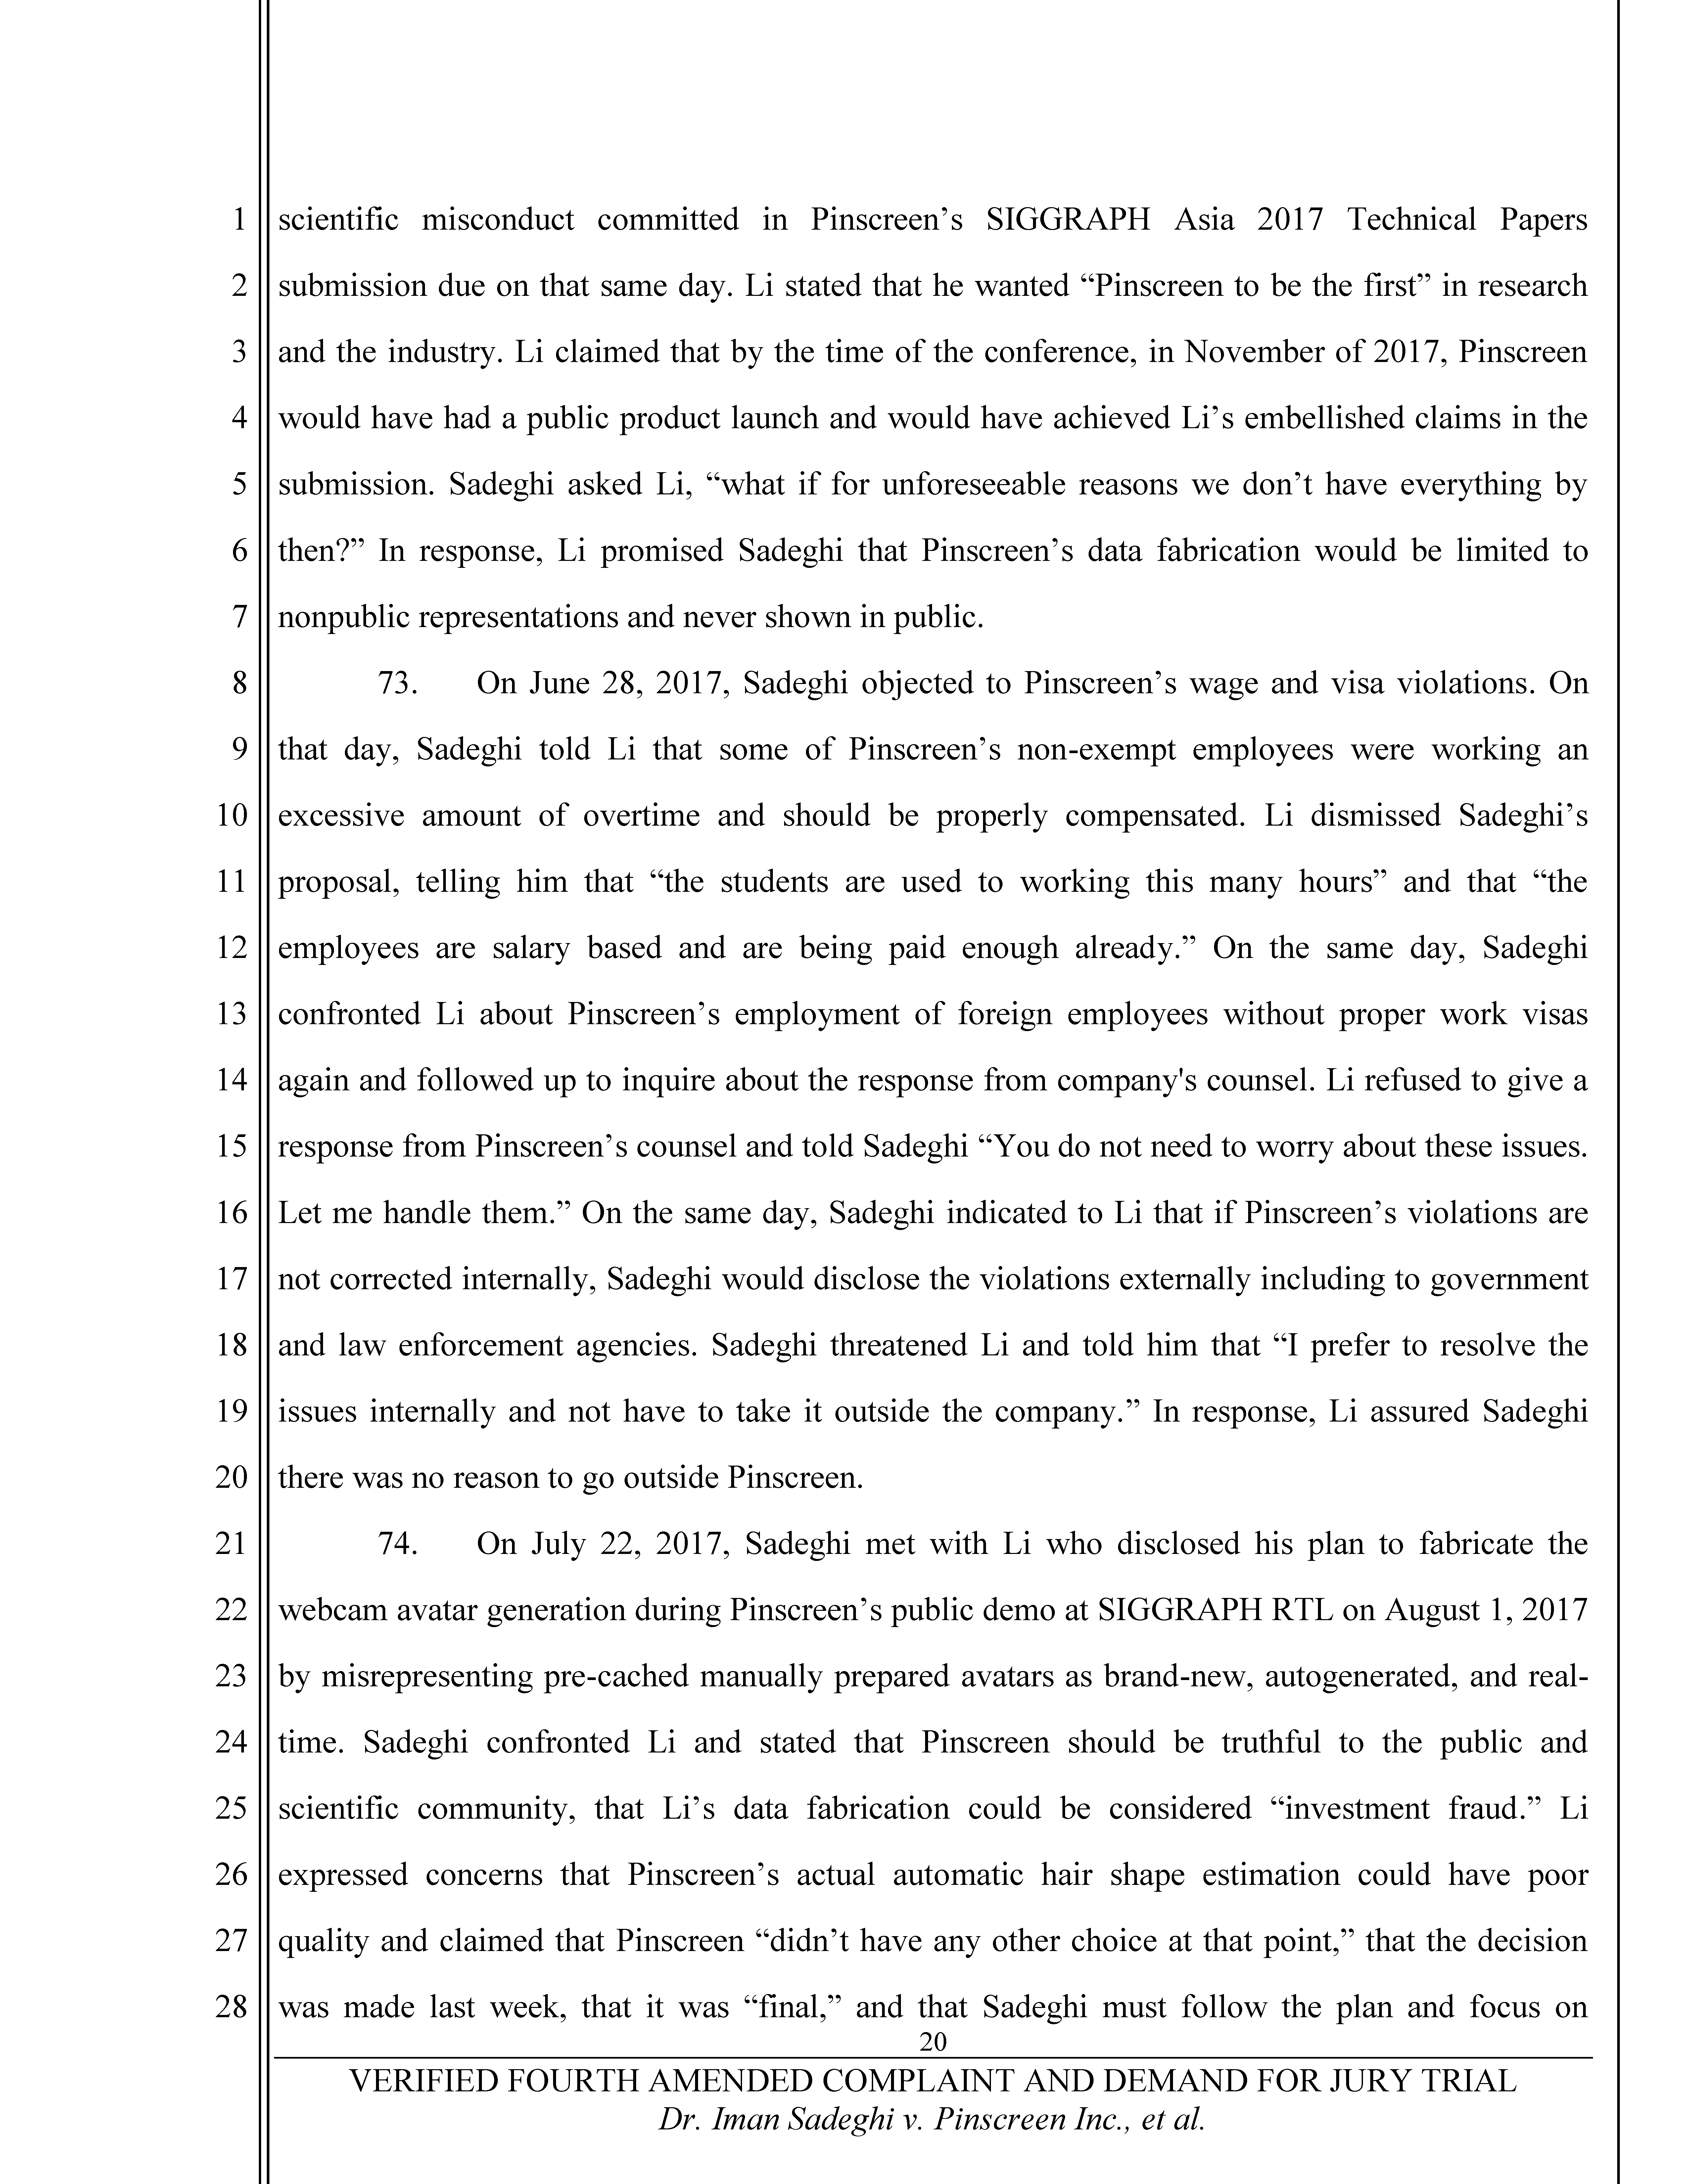 Fourth Amended Complaint (4AC) Page 21